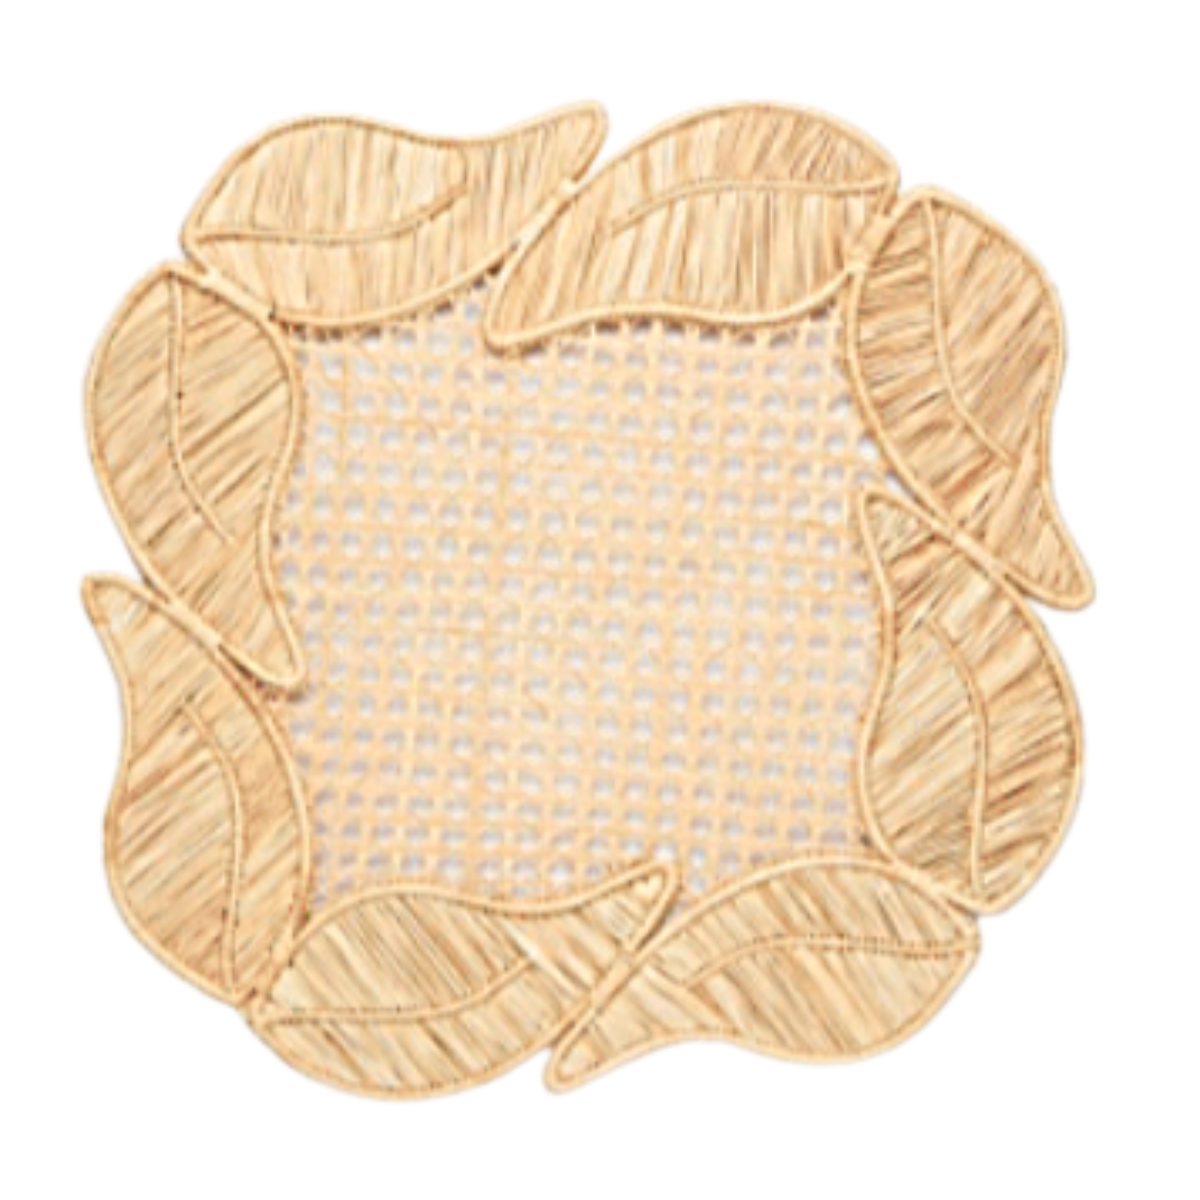 Hand Woven Leaf Border Natural Placemat-Bespoke Designs